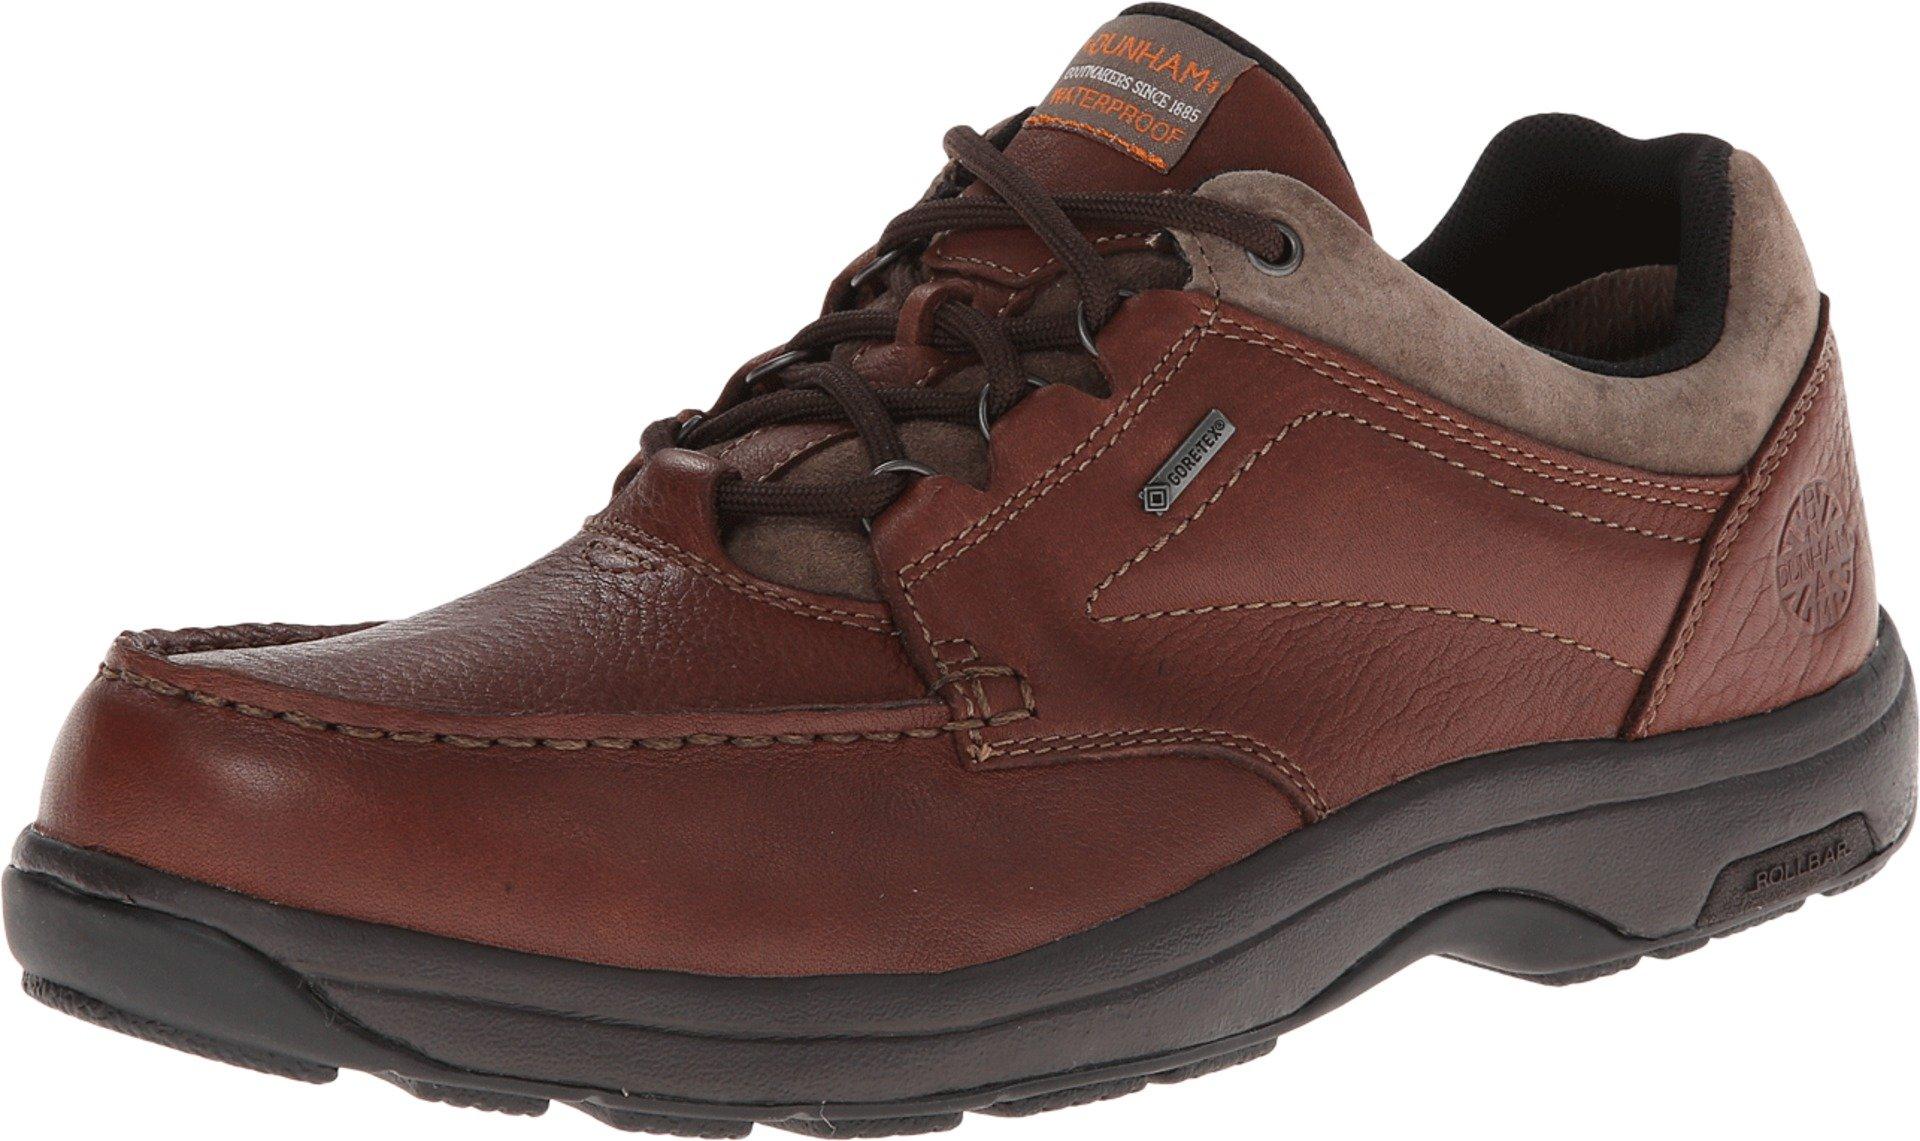 Dunham Leather Exeter Low in Brown for Men - Lyst